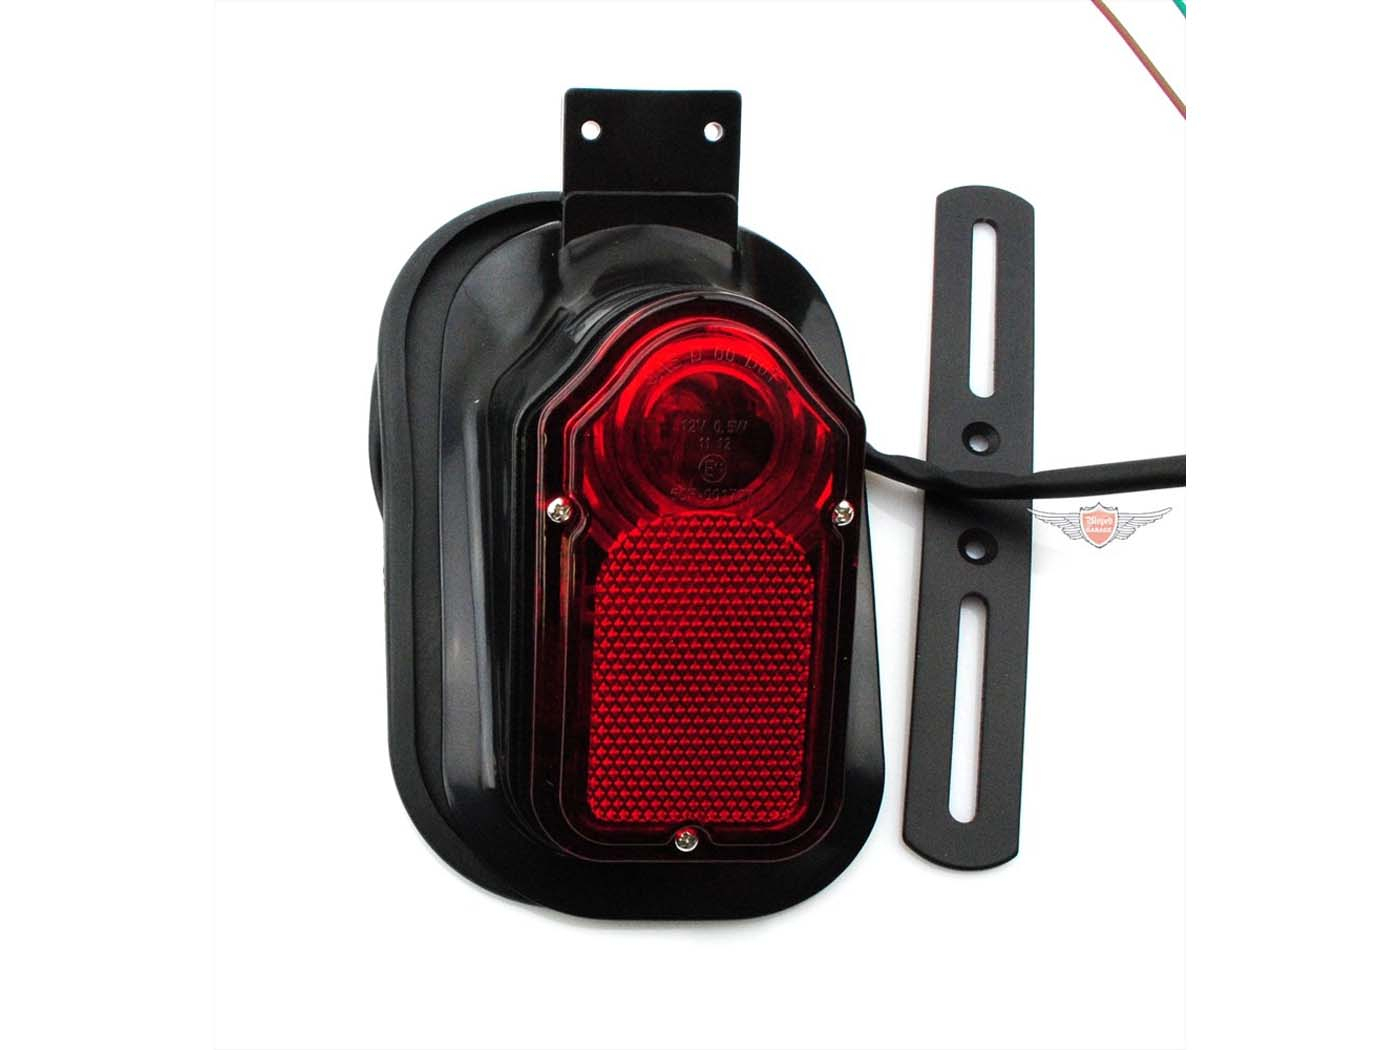 Black Tail Light Tombstone For Harley Chopper Motorcycle